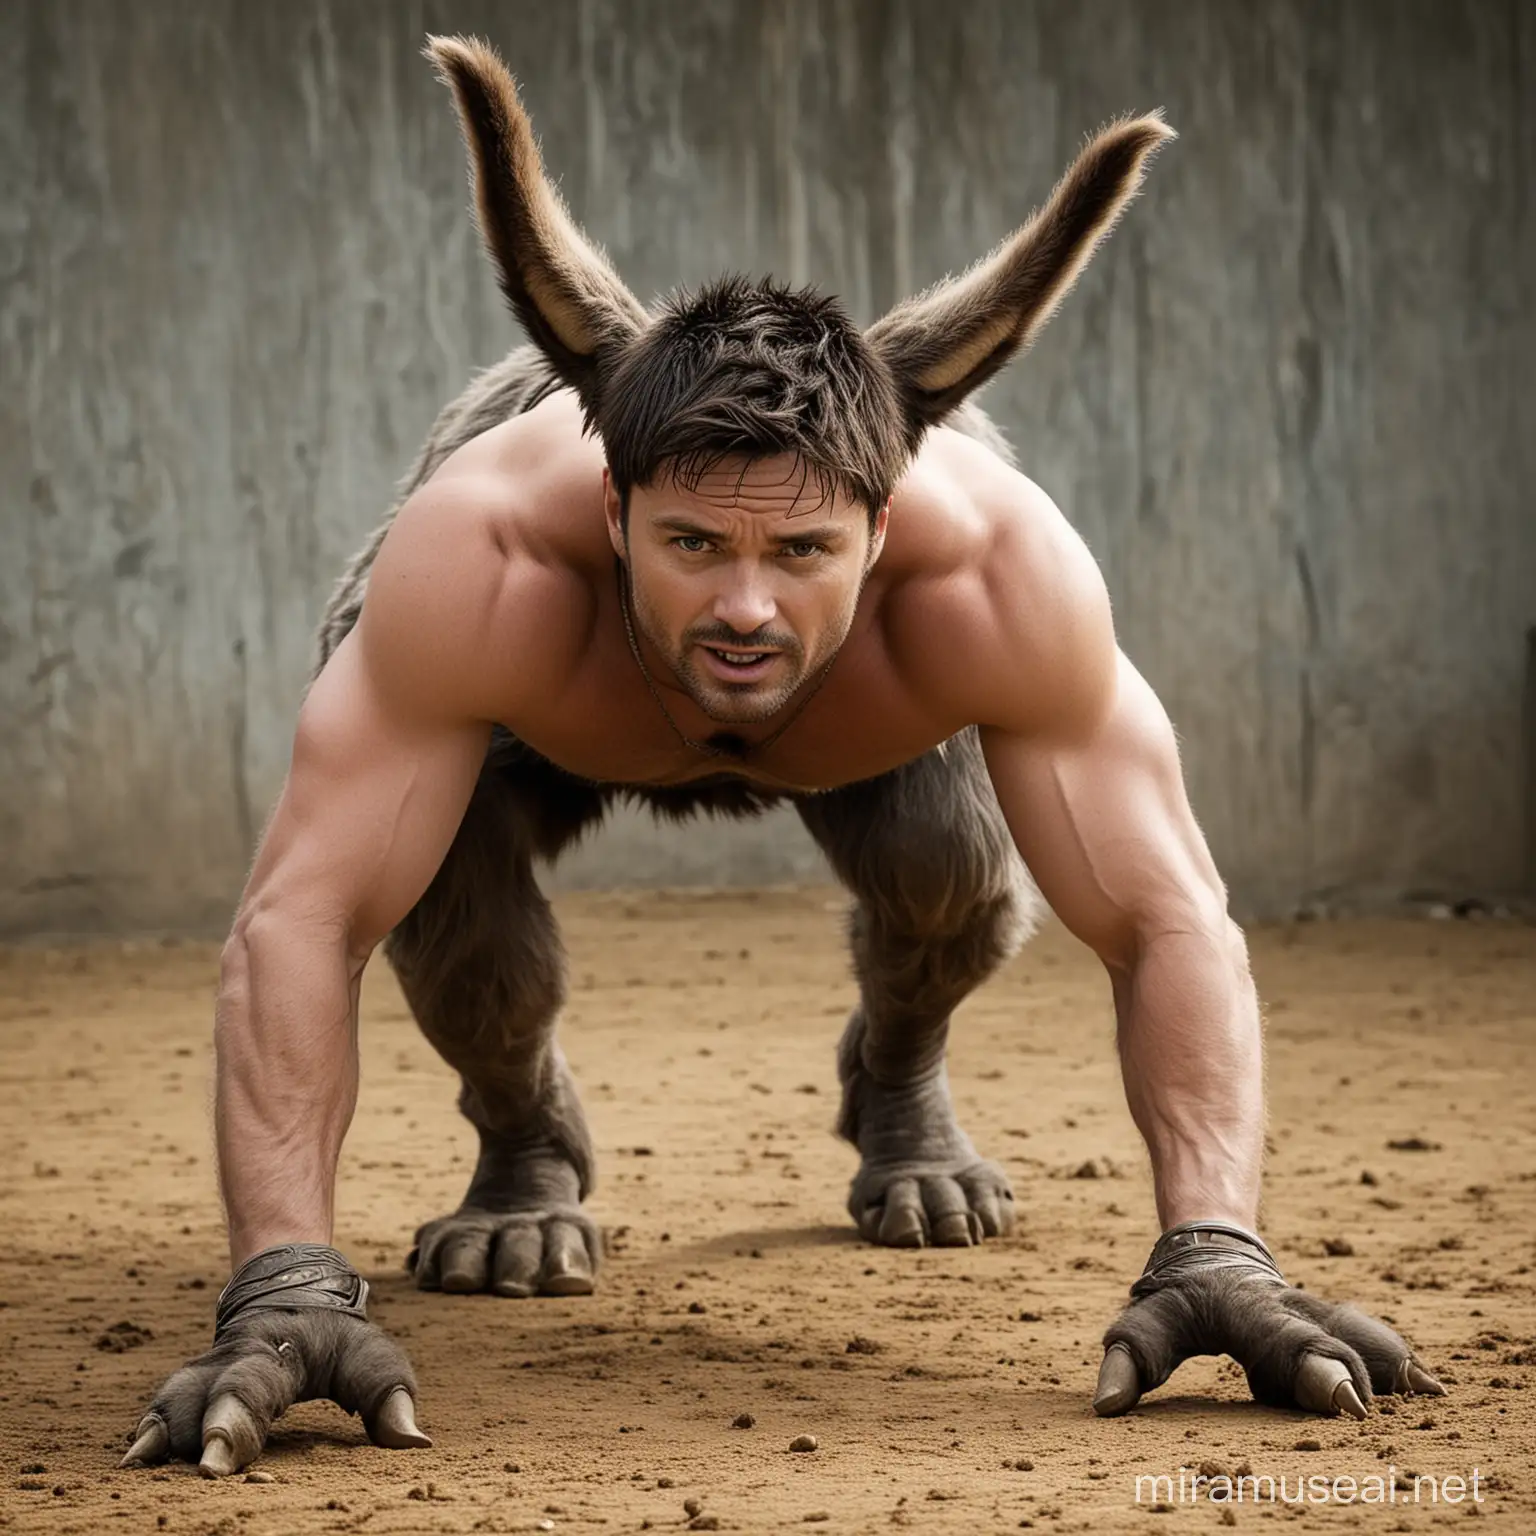 Karl Urban on all fours transforming into a donkey. He has donkey ears. He has donkey legs. He has donkey hooves. He has a donkey tail. He has a complete donkey body. And he's braying like a donkey. But his head is human.